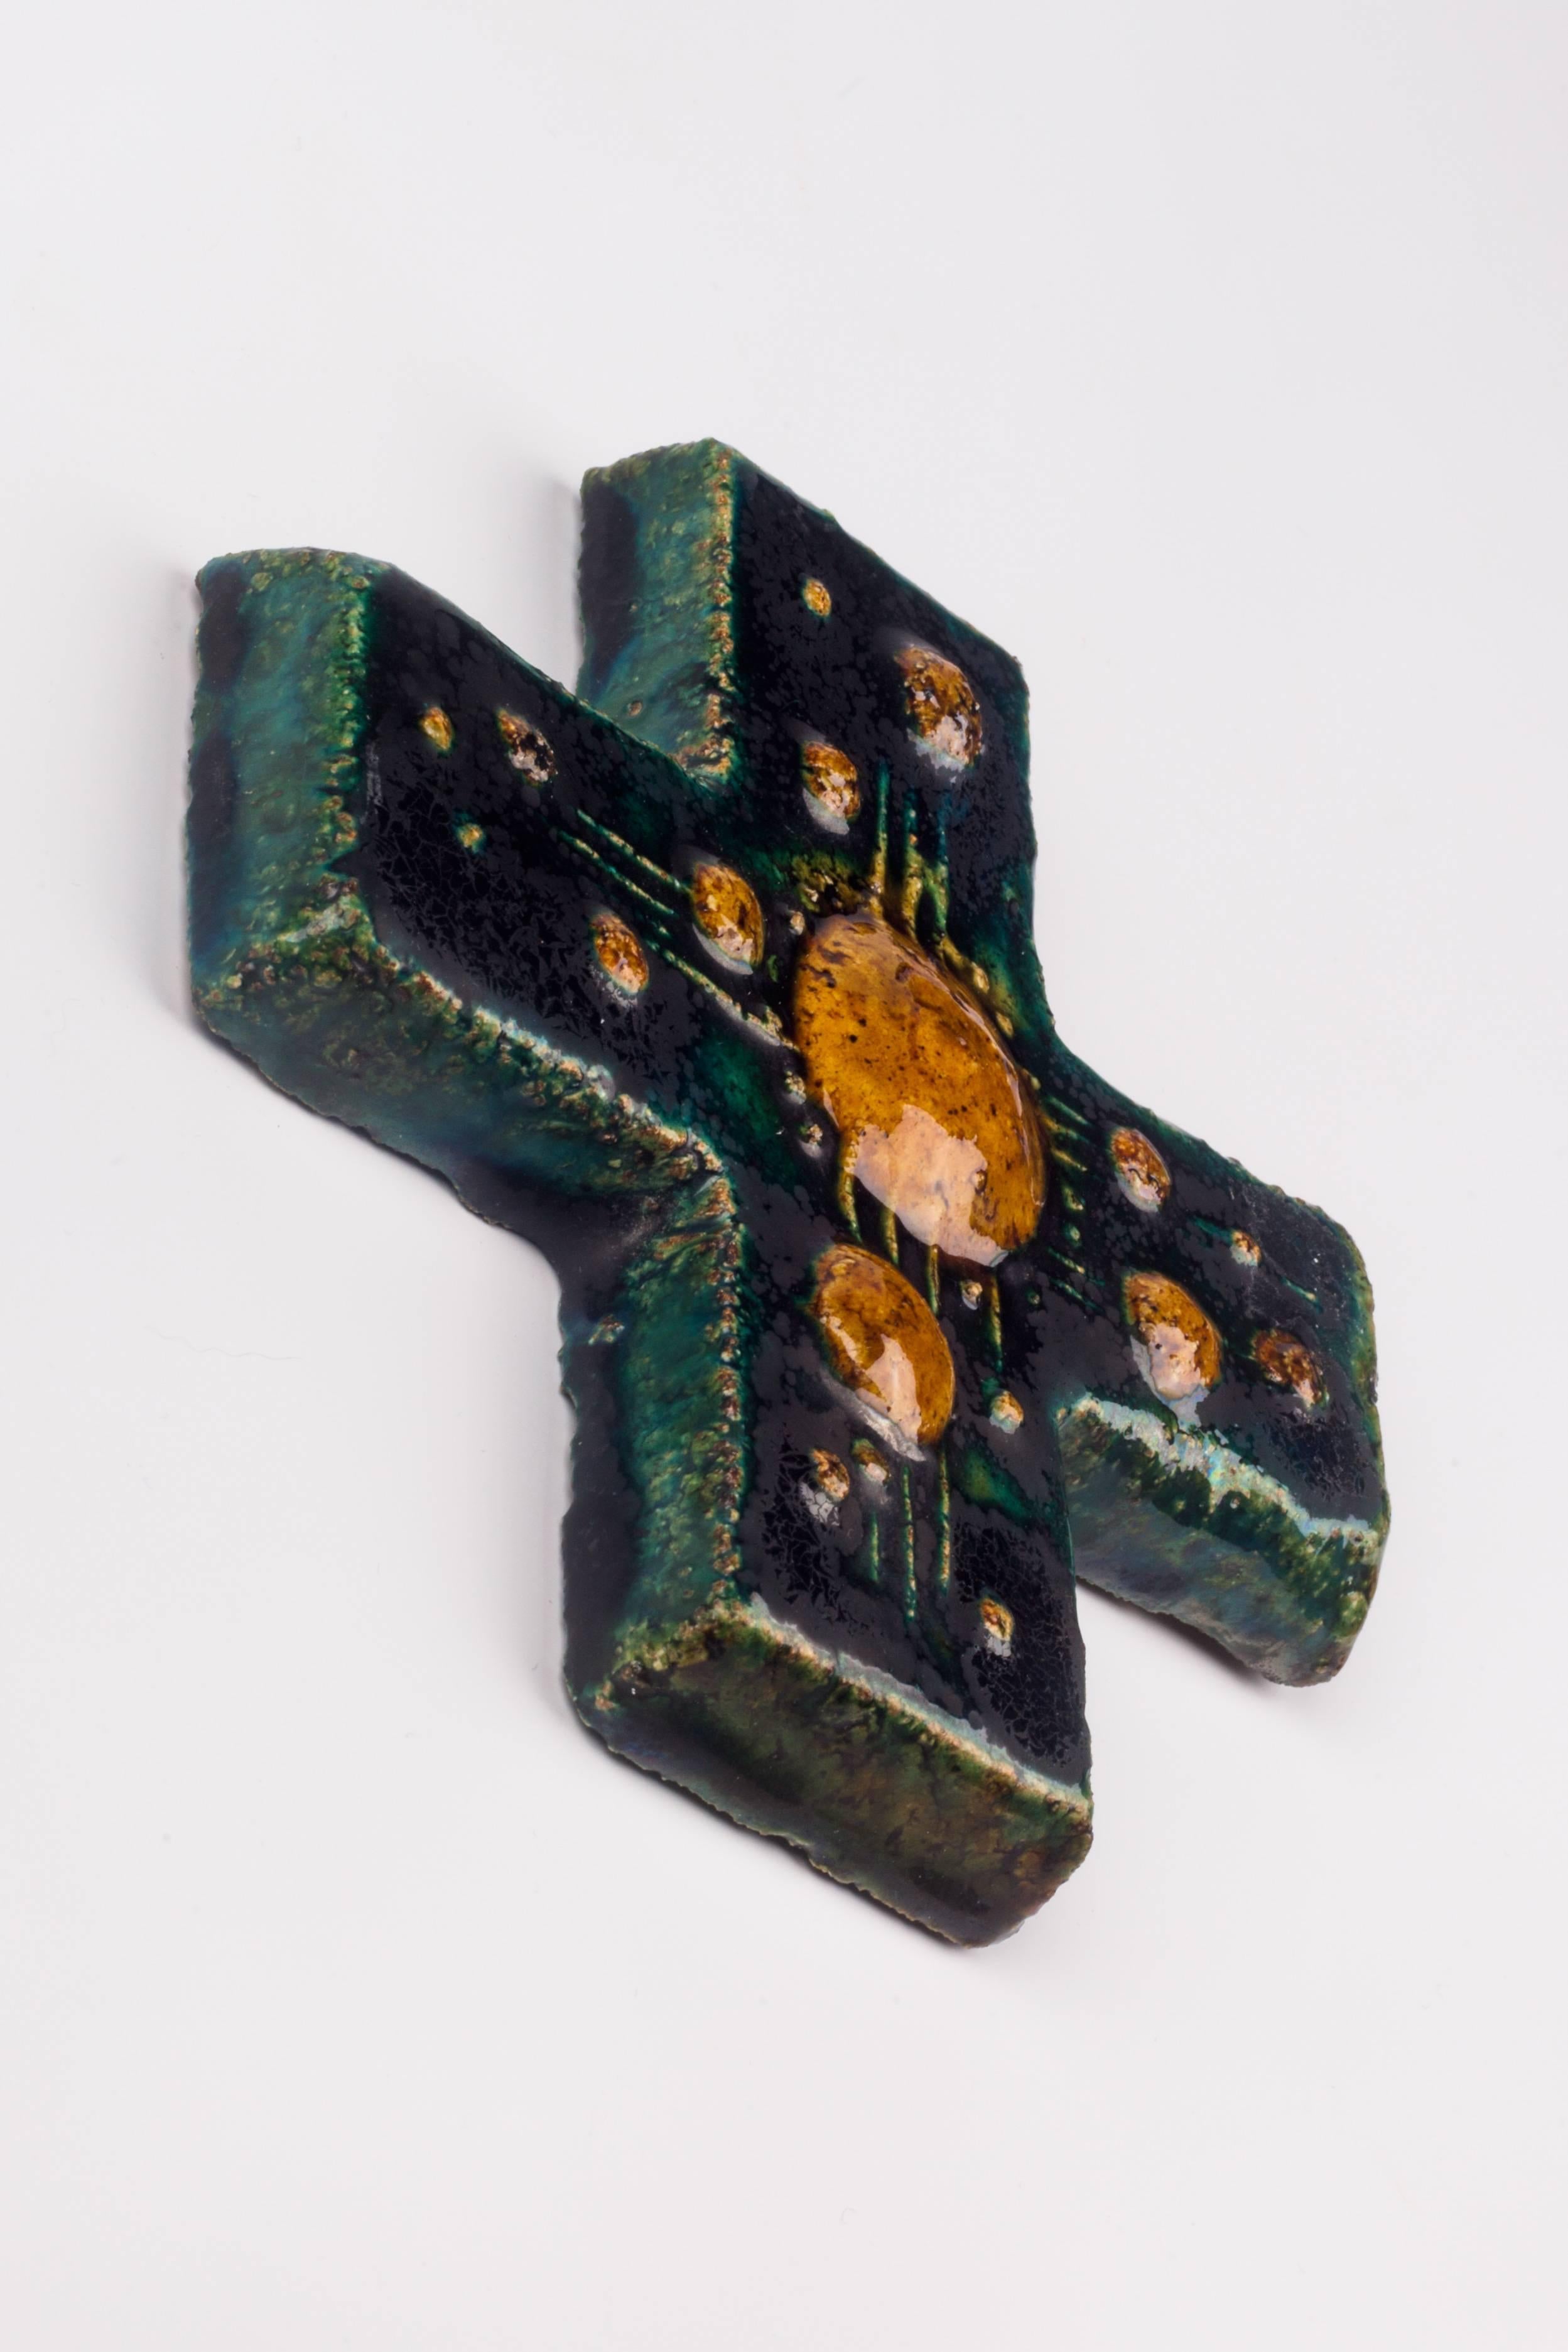 Wall cross in ceramic, made in Belgium in the 1970s.
Hand-painted, glossy blue-green cross with decorative brown circles and cross hatch in volume. 

This piece is part of a 69 piece ceramic crucifix collection, all made in Belgium between the 1950